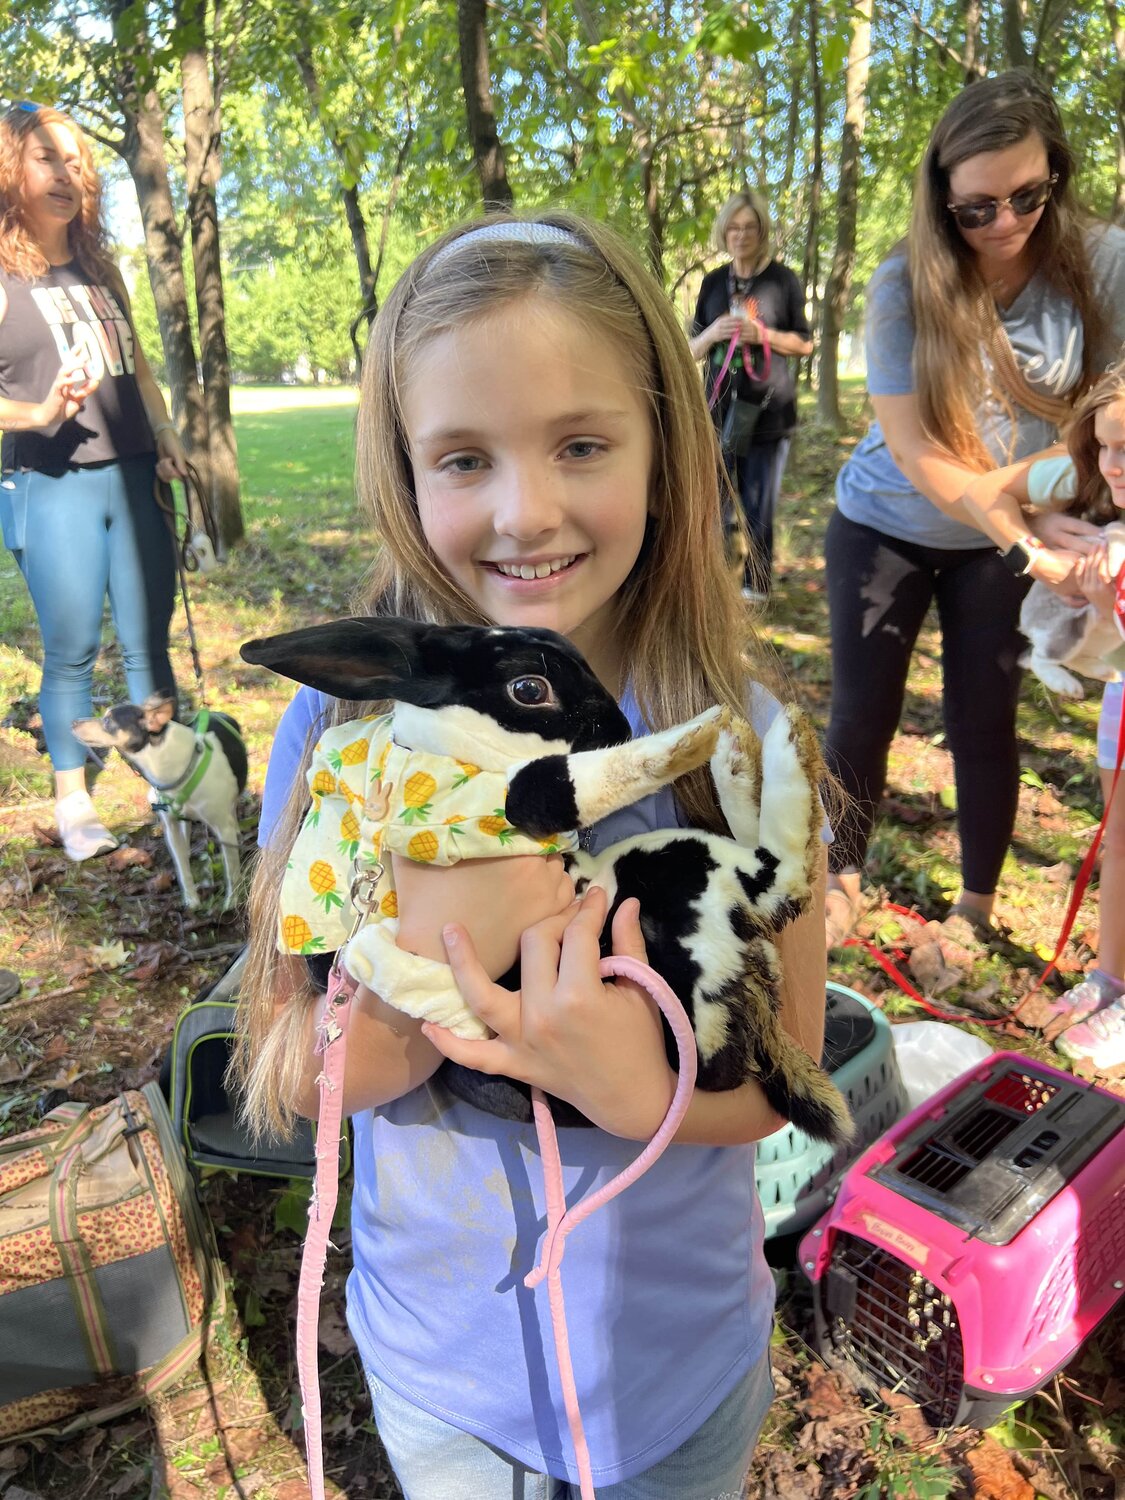 These sisters made sure their family hopped to the annual Blessing of Animals with their long-eared pets.